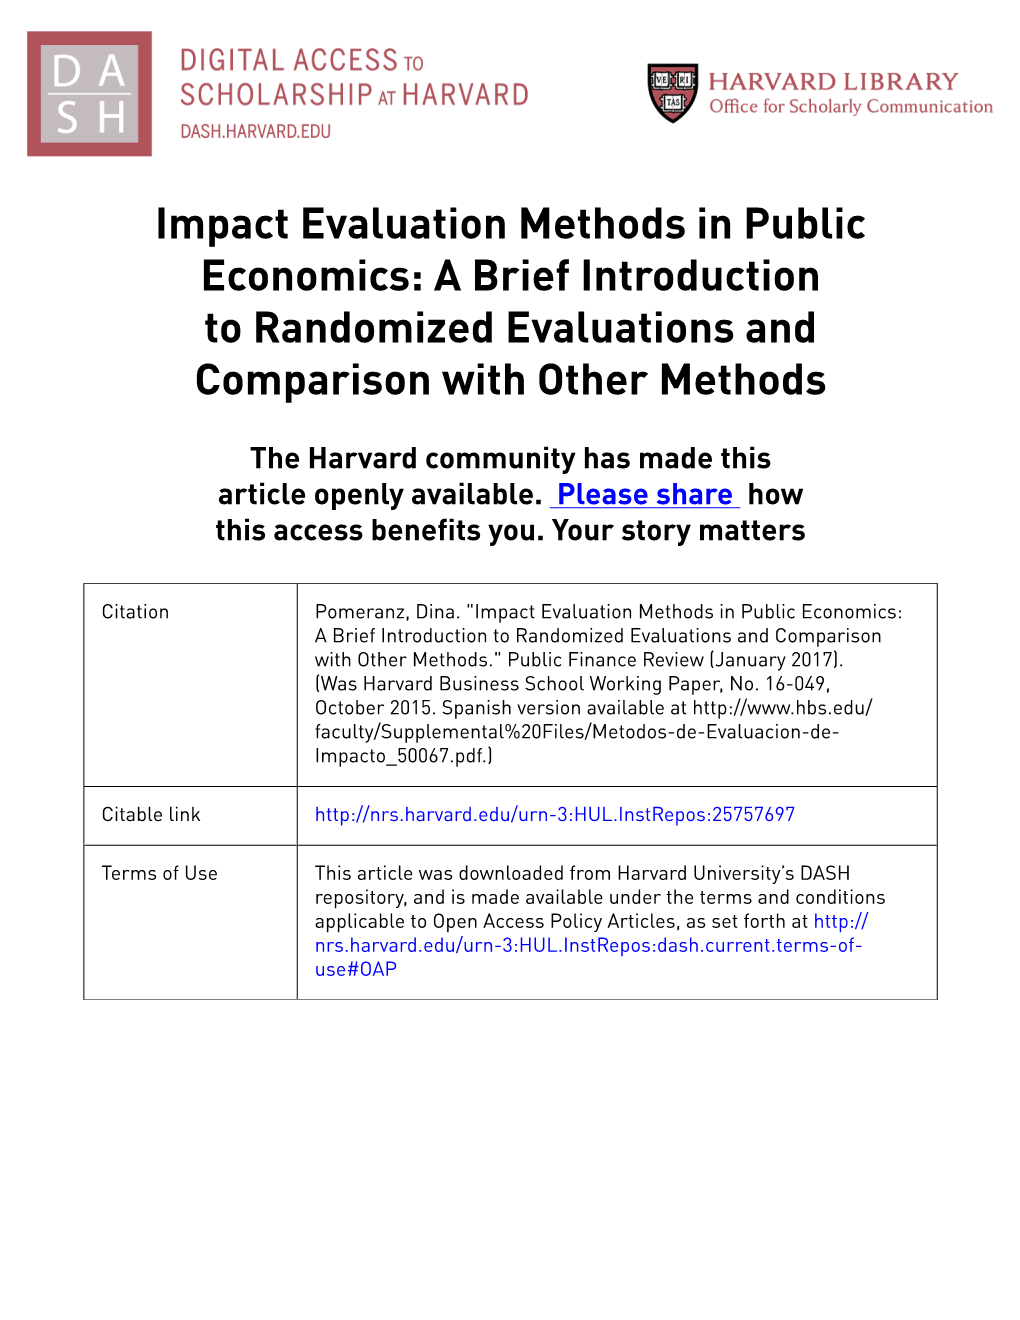 Impact Evaluation Methods in Public Economics: a Brief Introduction to Randomized Evaluations and Comparison with Other Methods